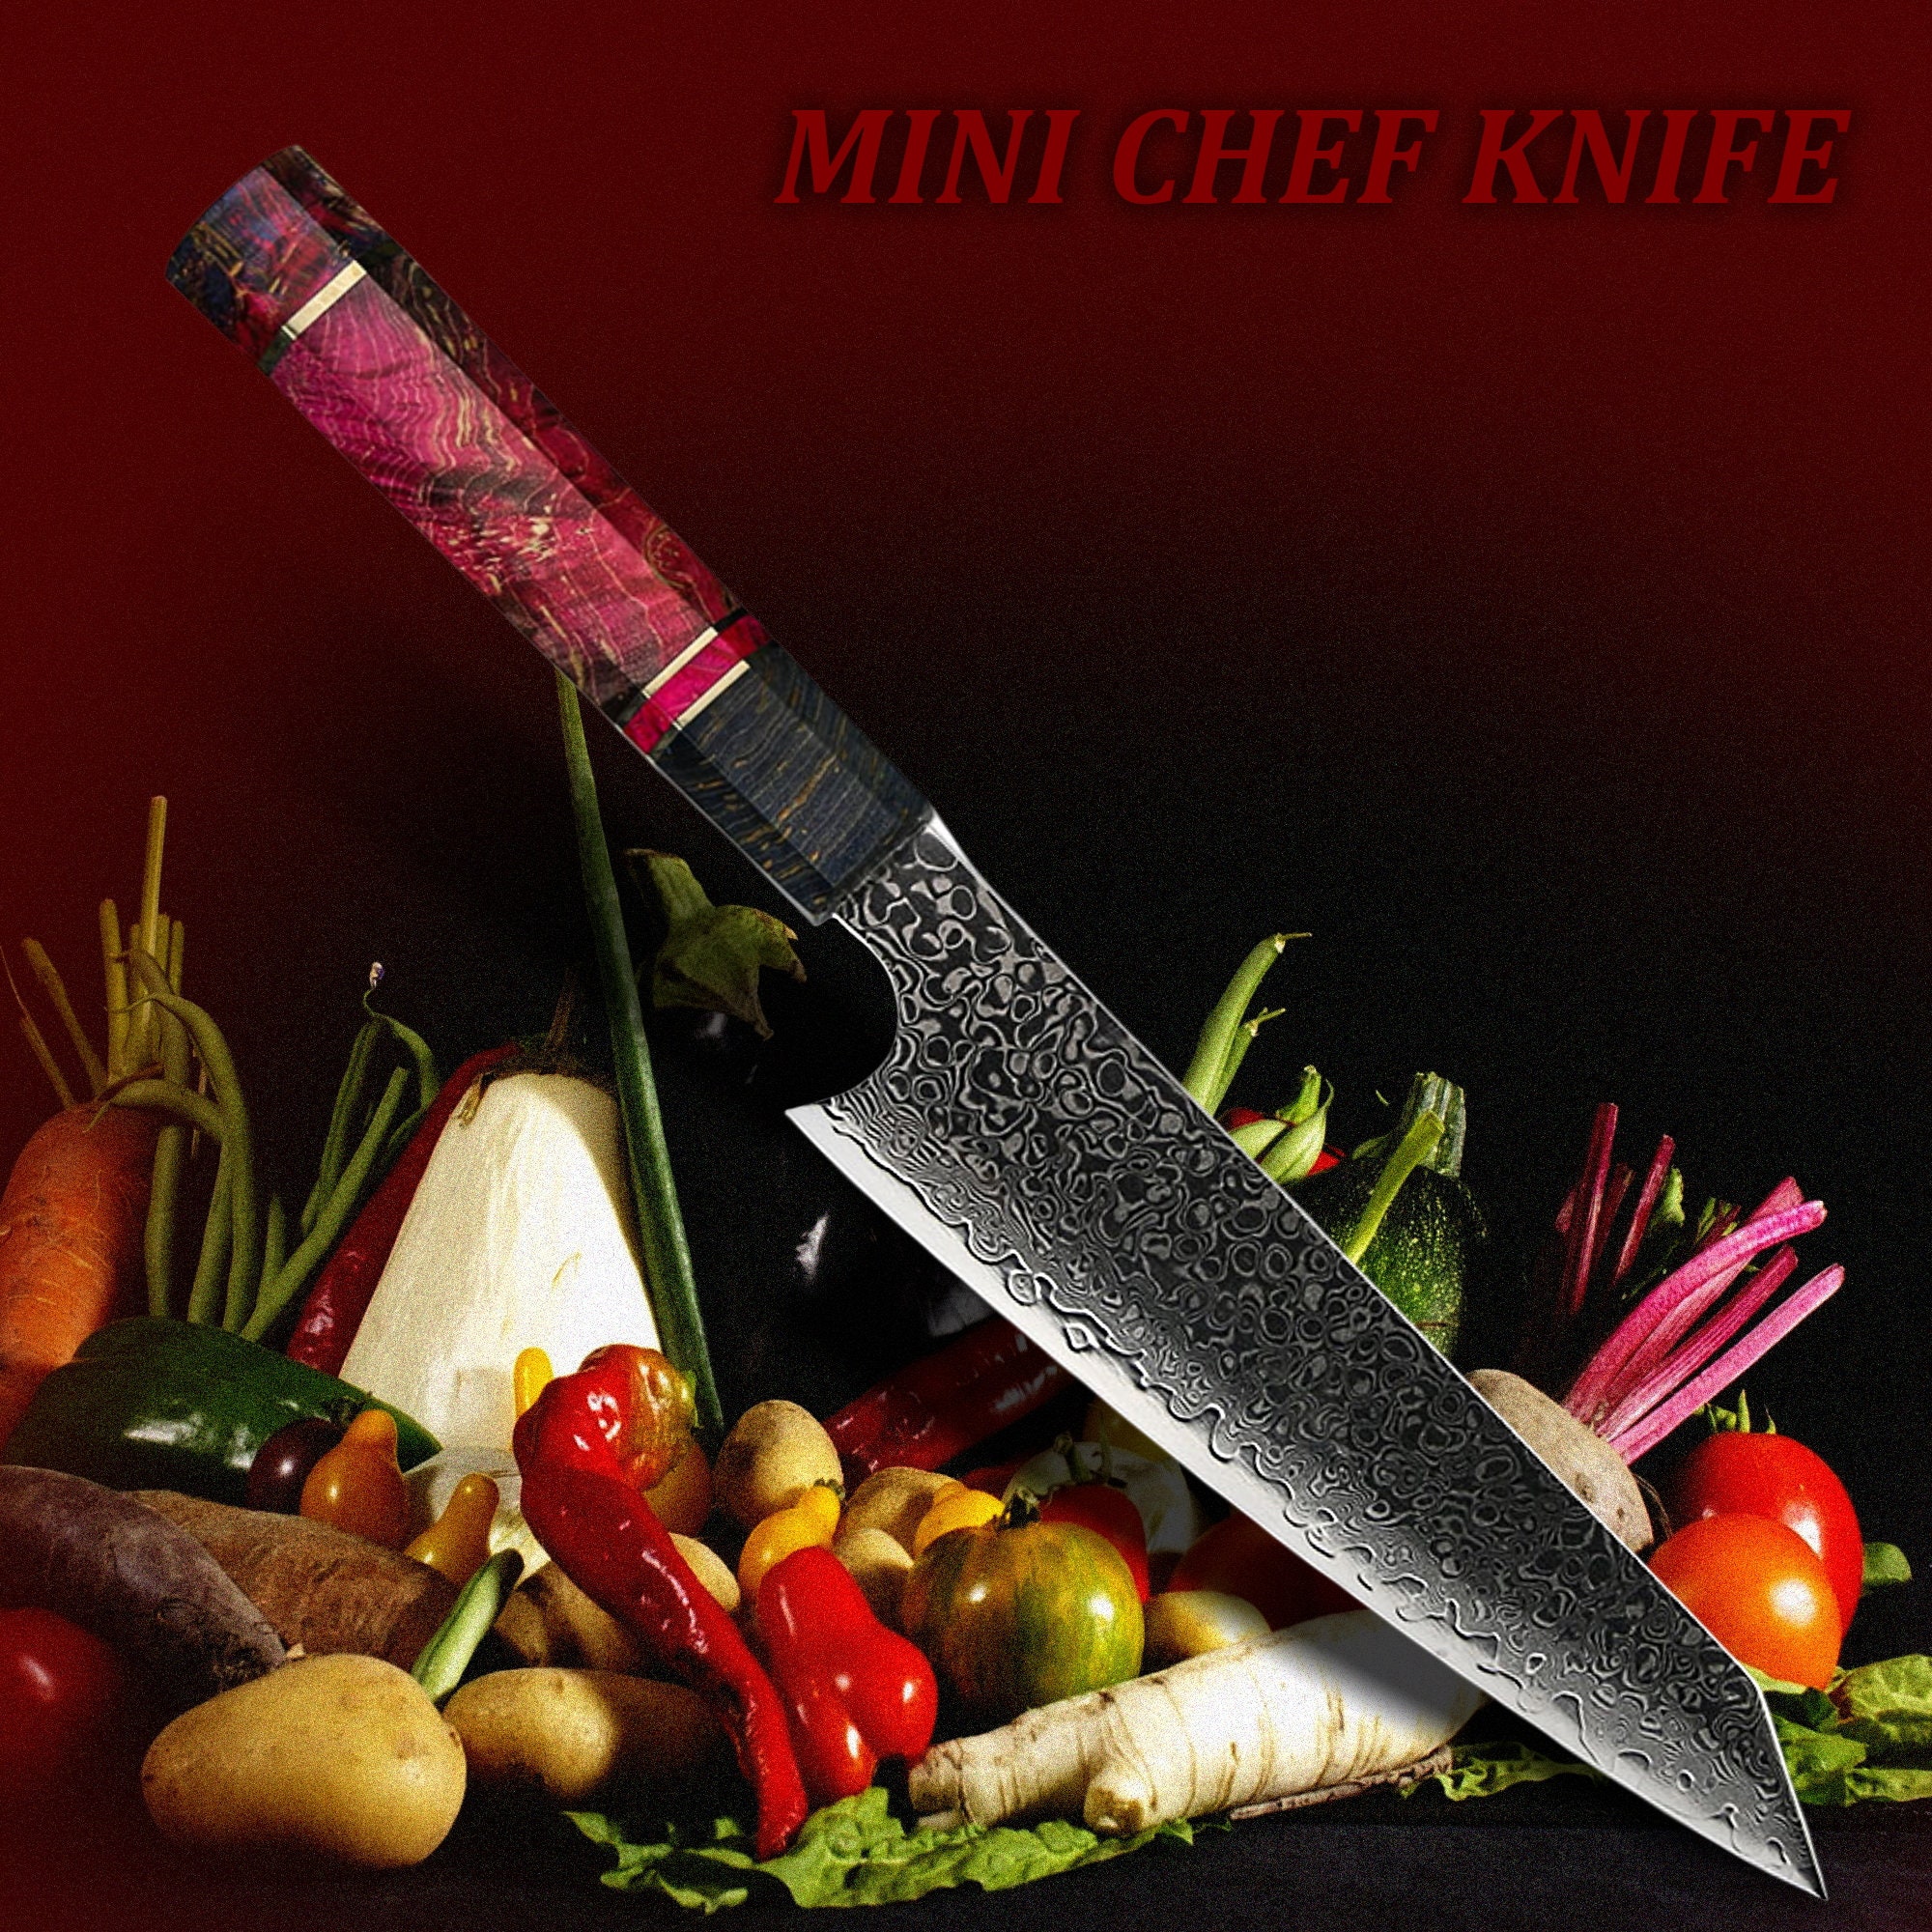 Good Cook Touch 8-Inch Carbon Steel Chef's Knife